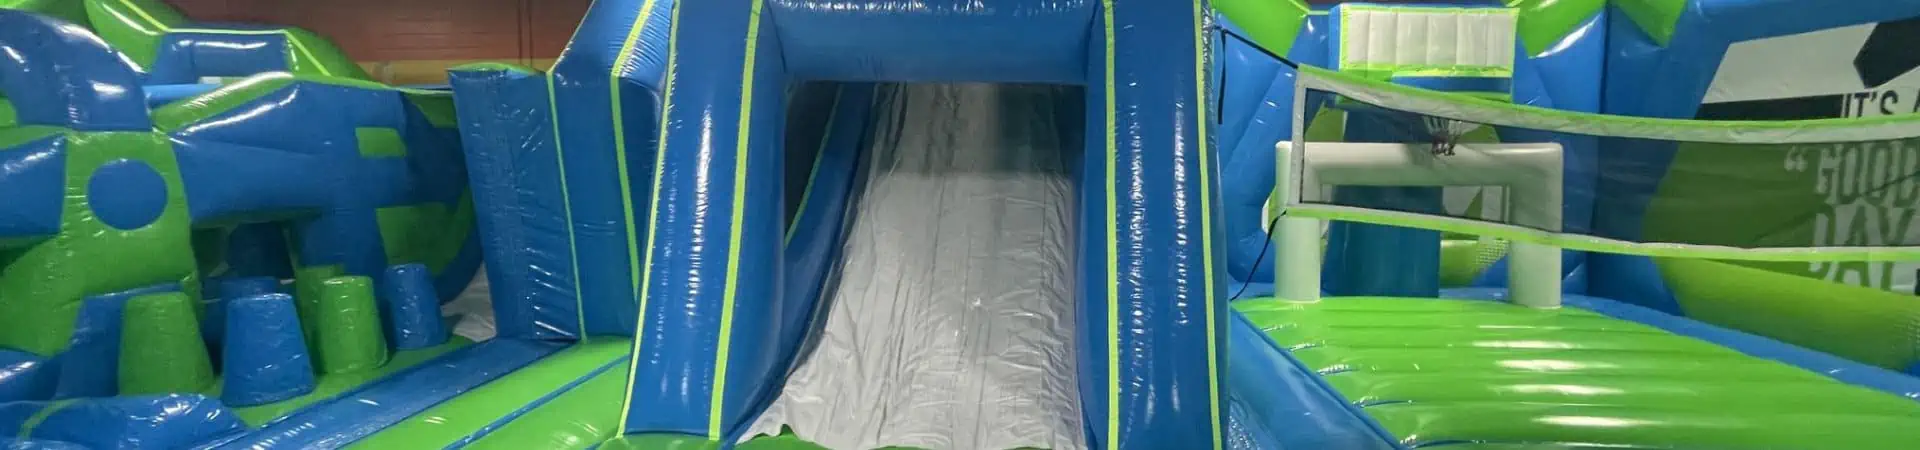 inflatable park discount